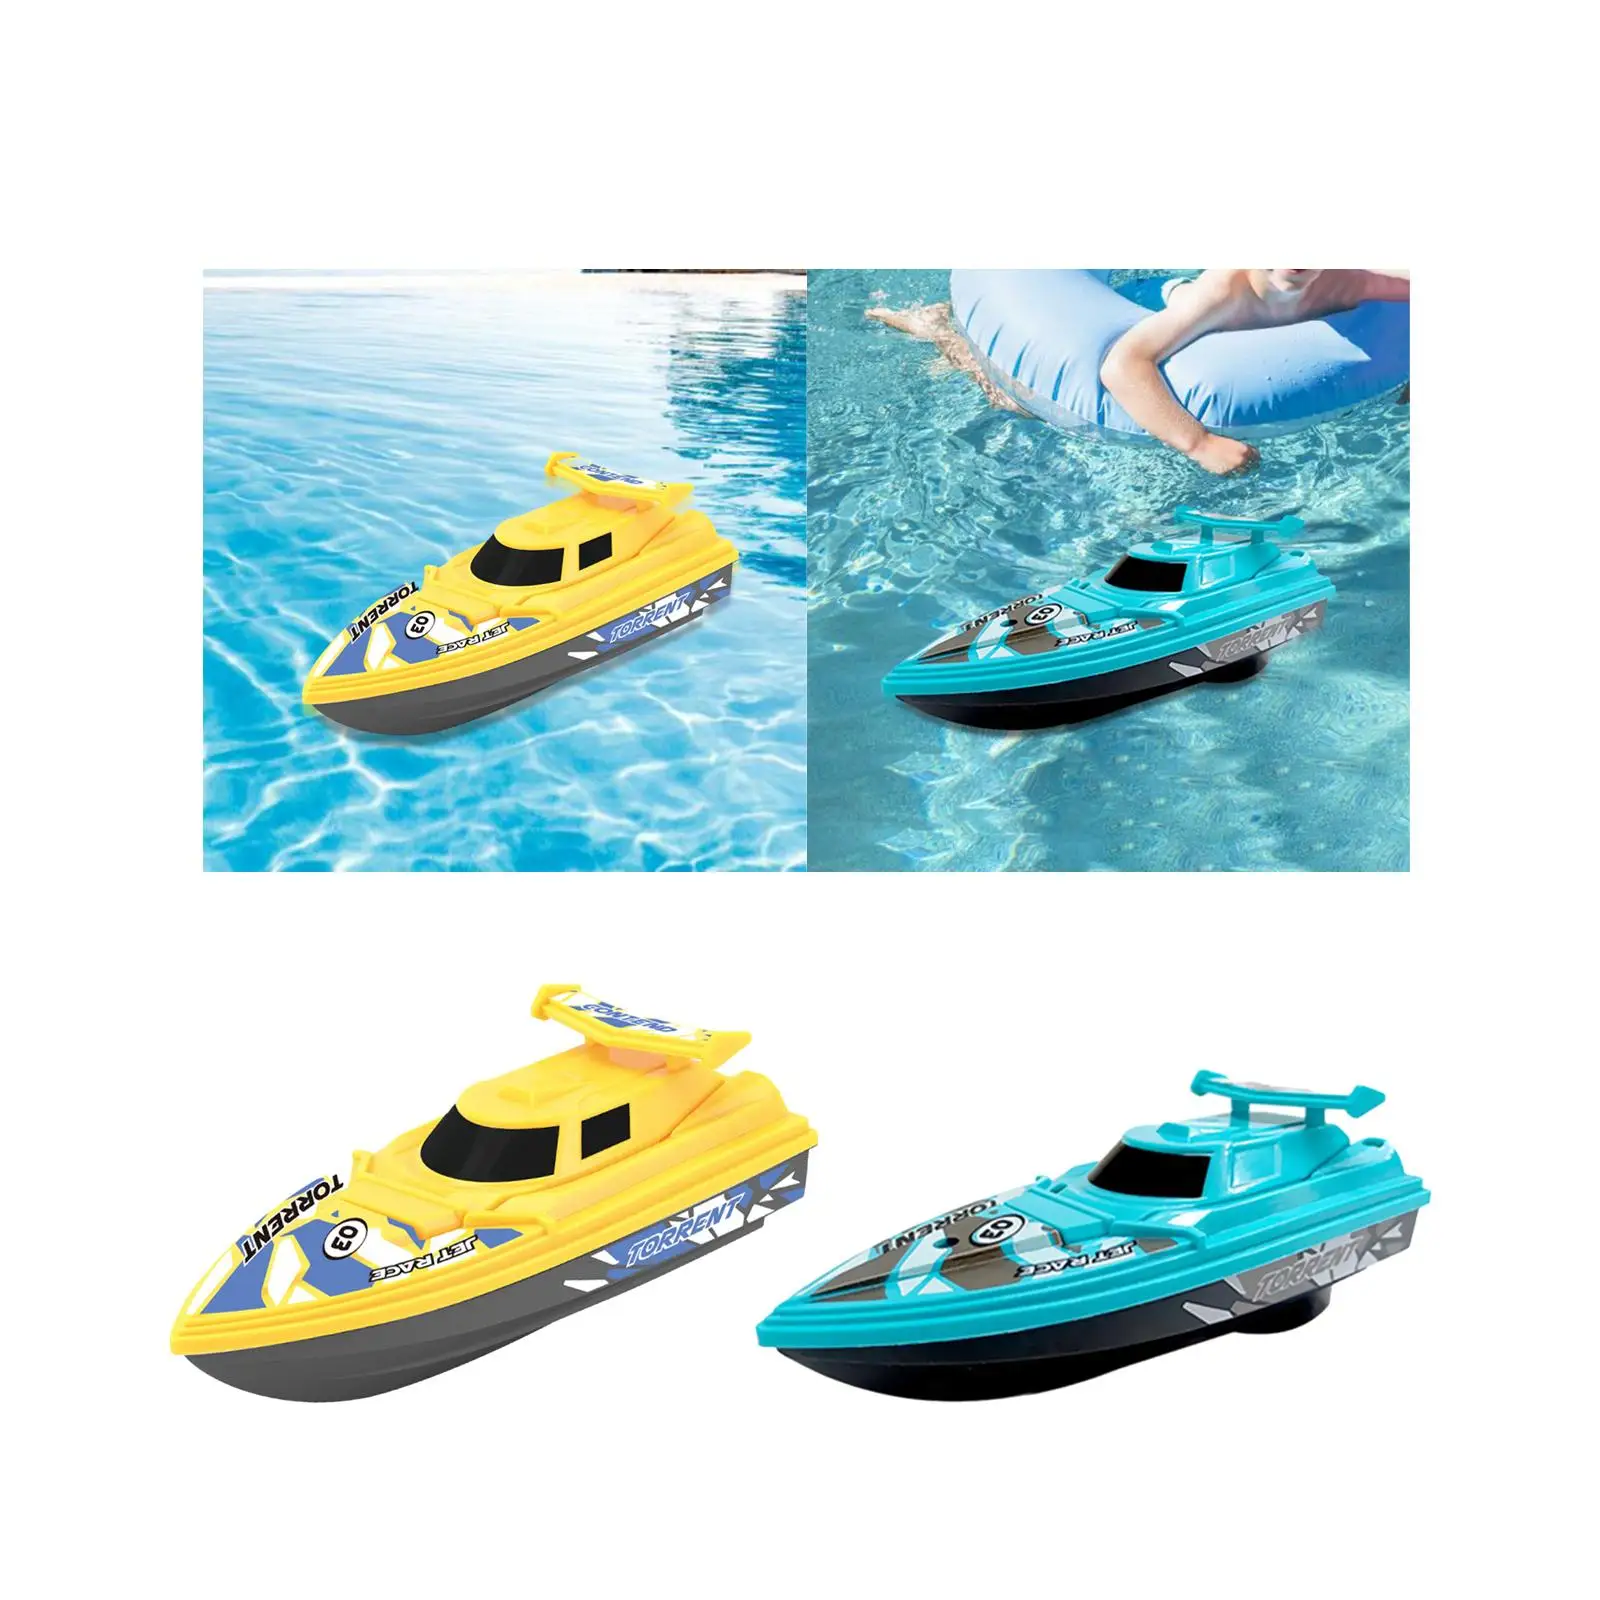 Sailing Boat Bathtub Toy Water Toy Beach Toys Christmas Gifts Birthday Gift Floating Toy Boats for Ages 1-3 Kids Toddlers Child